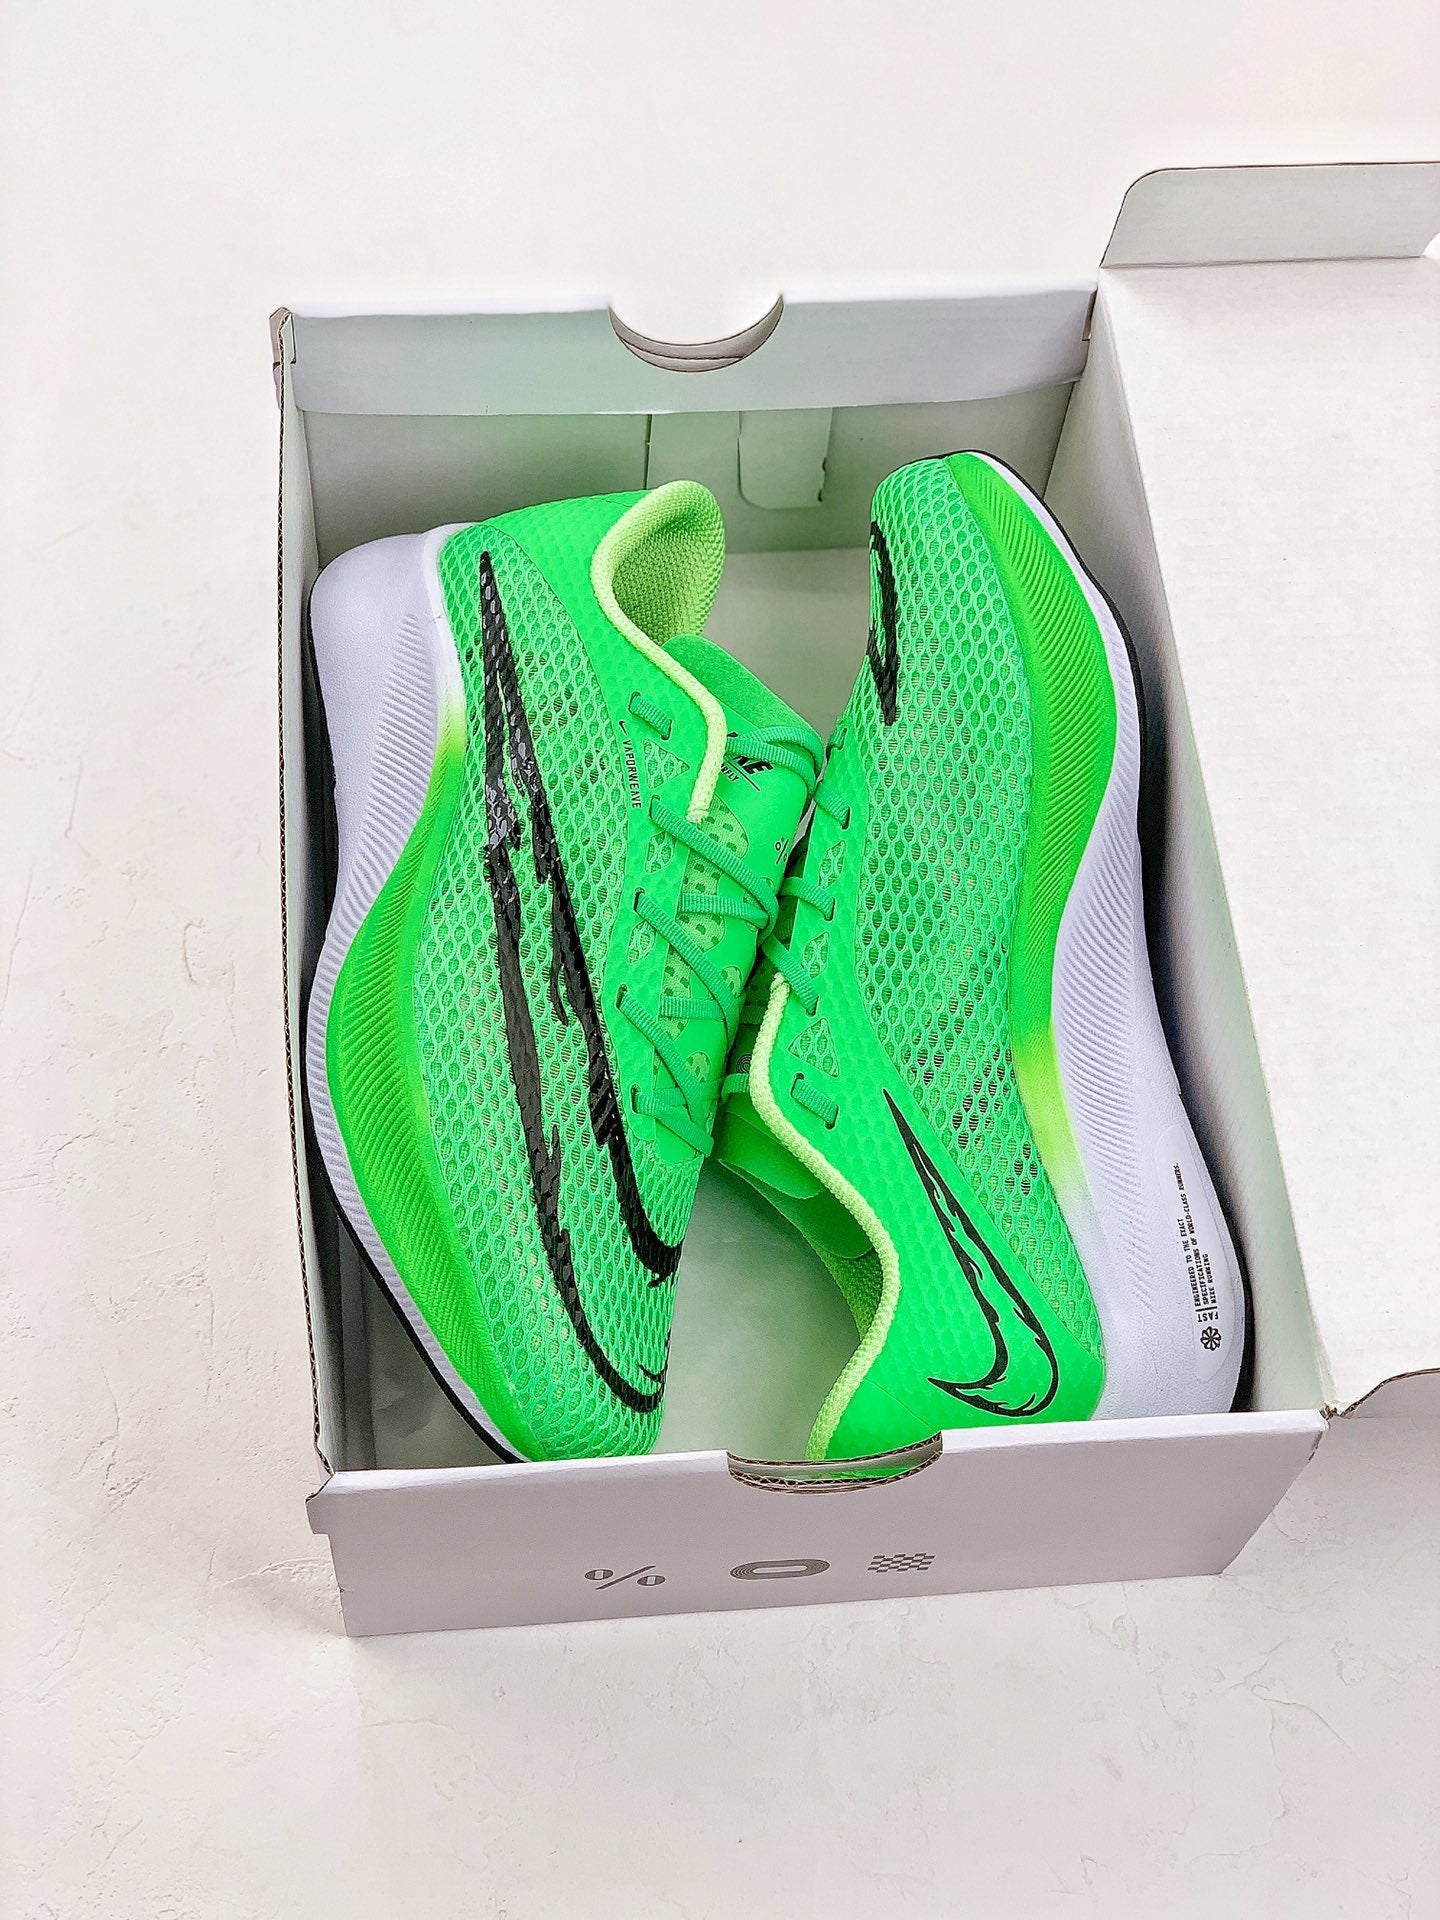 NK zoom Fly 7 Green